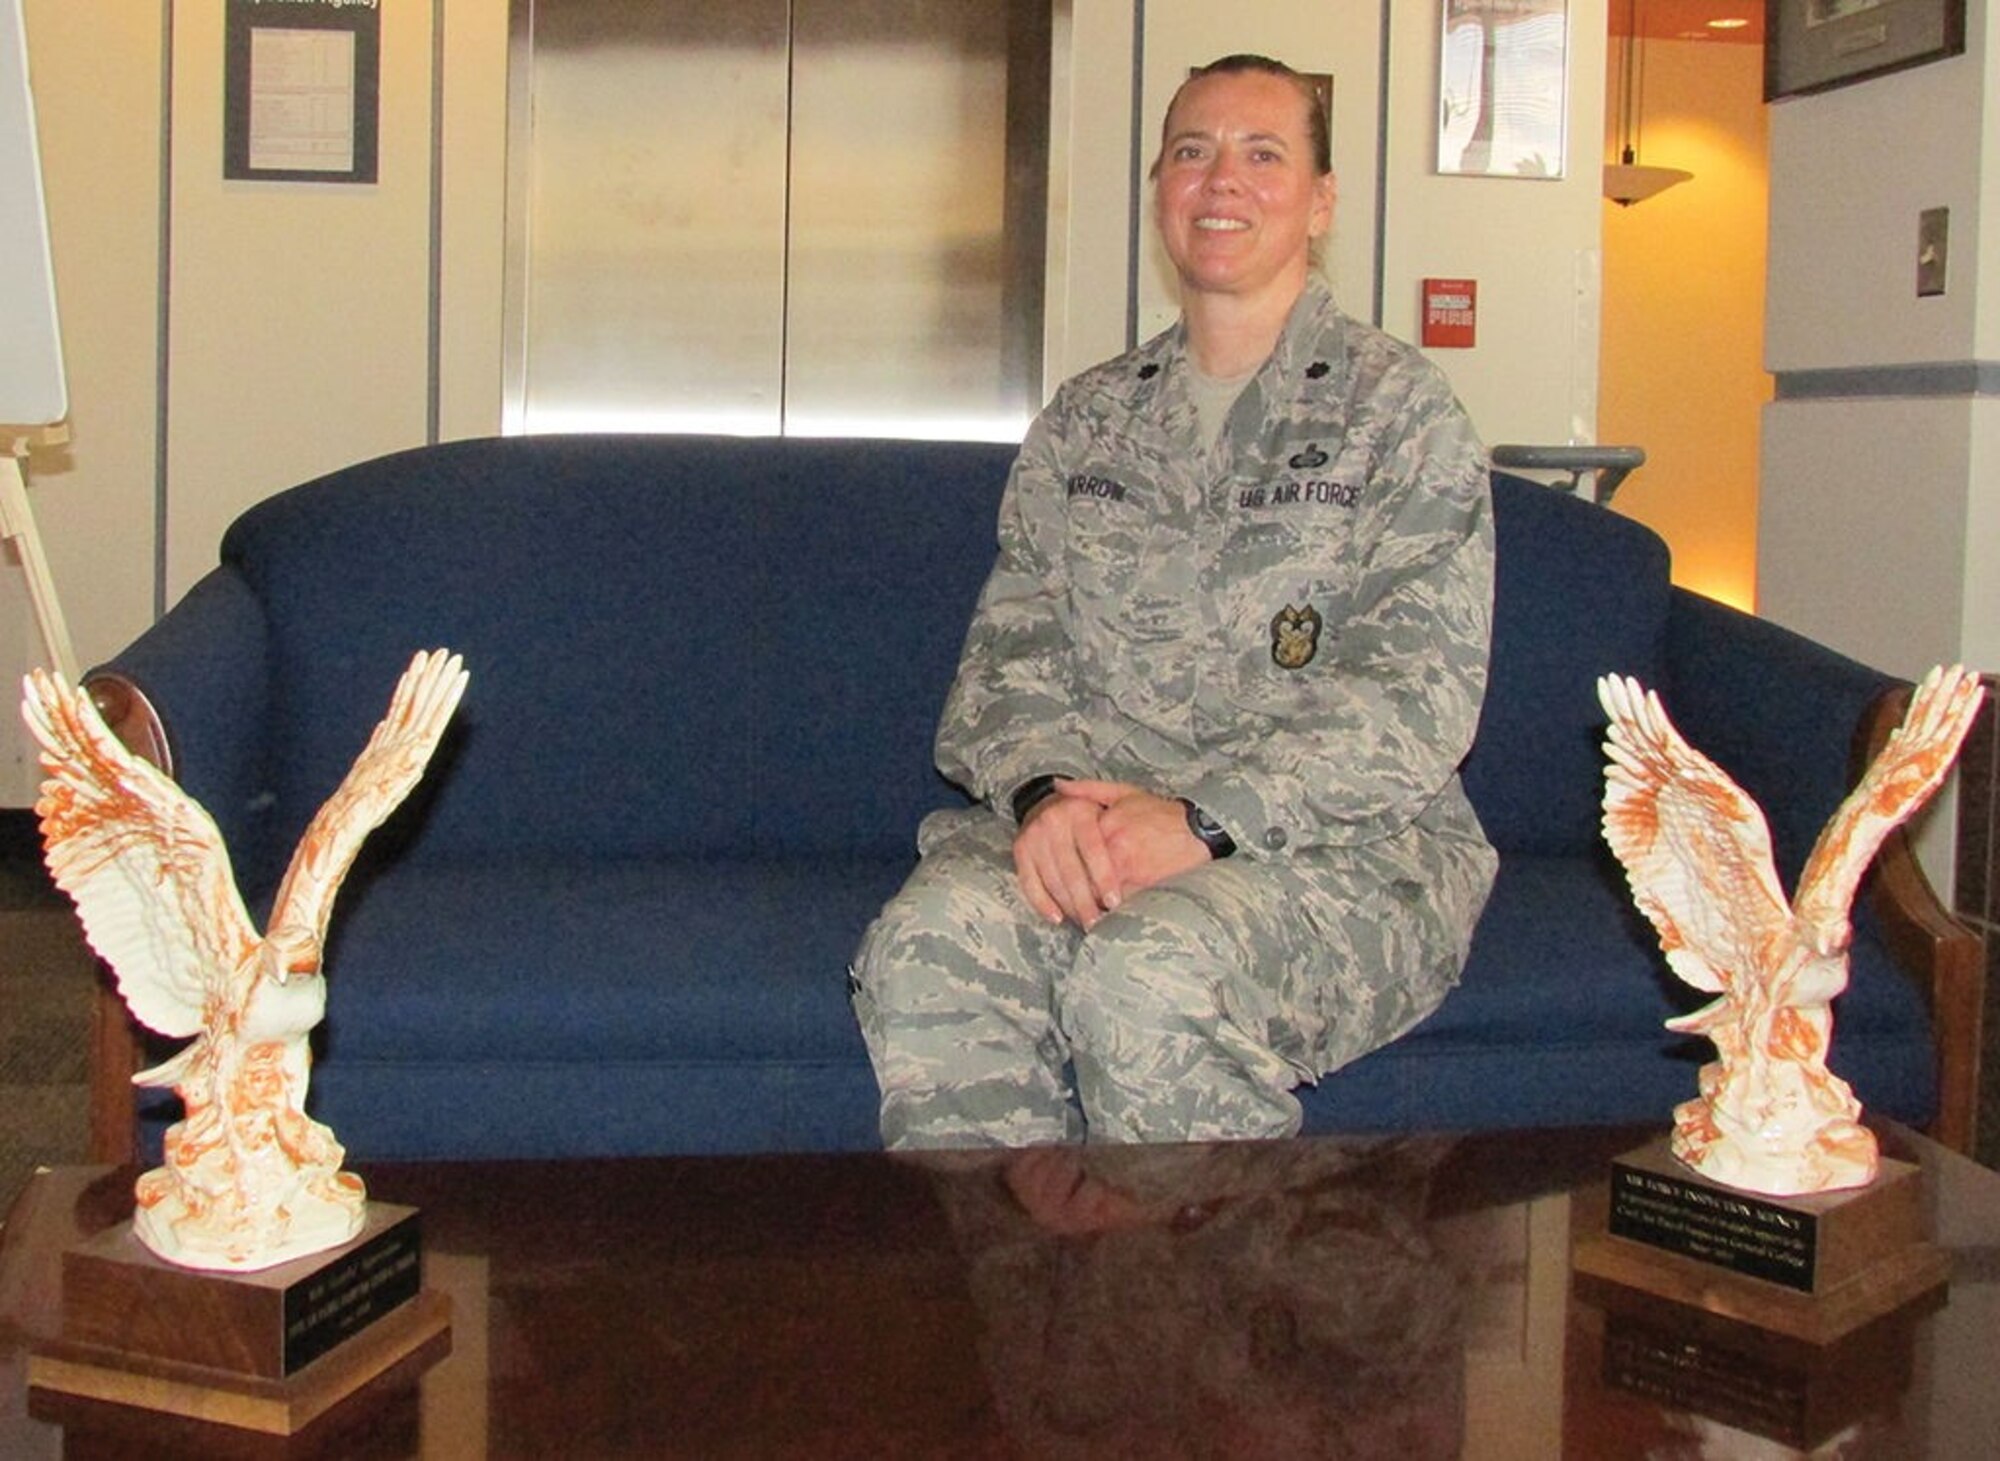 Lt. Col. Teresa Darrow of the Air Force Inspection Agency was named the operational Personnel Field Grade Officer of the Year for 2015 at the Air Force level. (Photo by Argen Duncan)